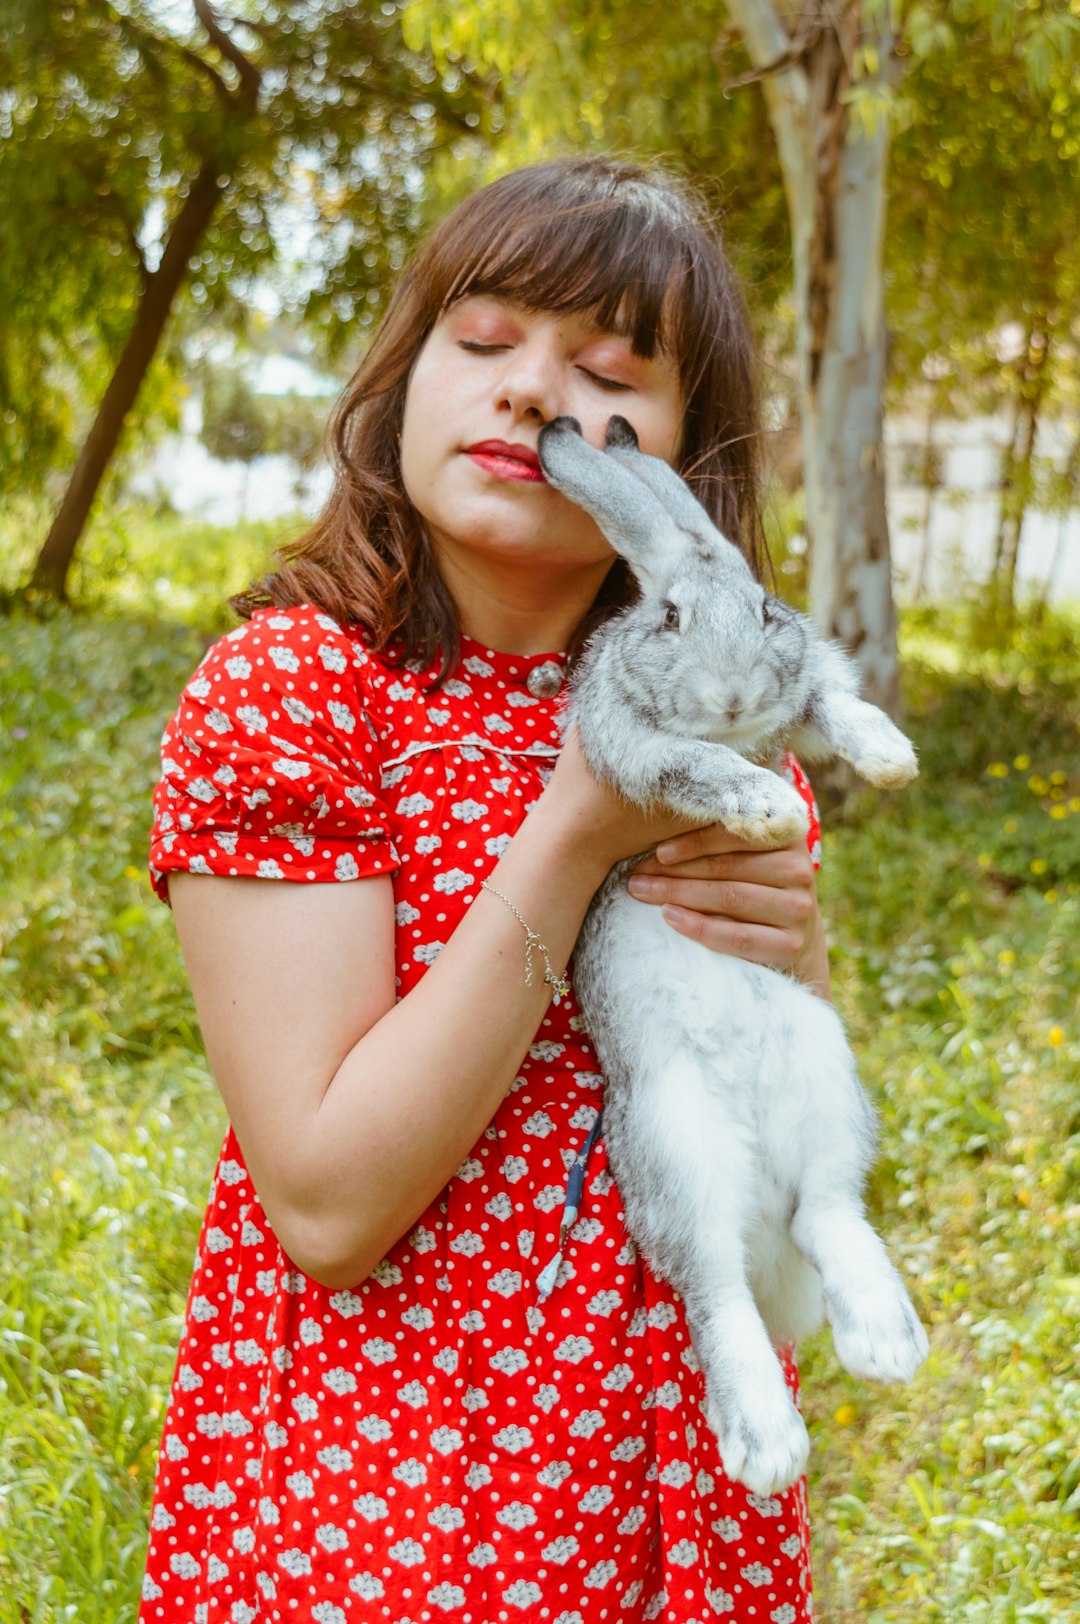 woman in red and white polka dot dress holding white rabbit